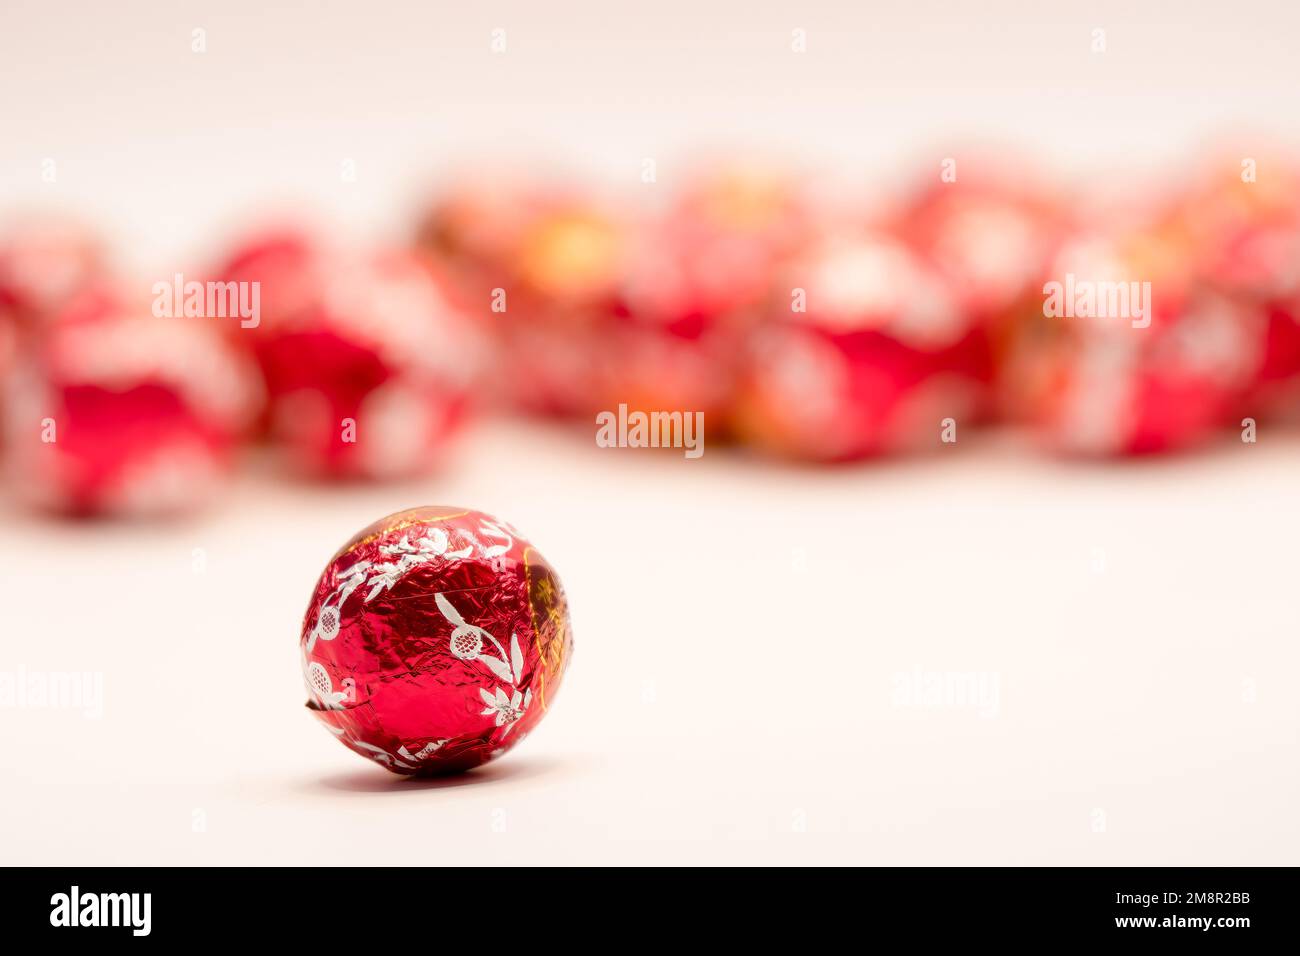 close-up of a red foil wrapped christmas chocolate ball sweet Stock Photo